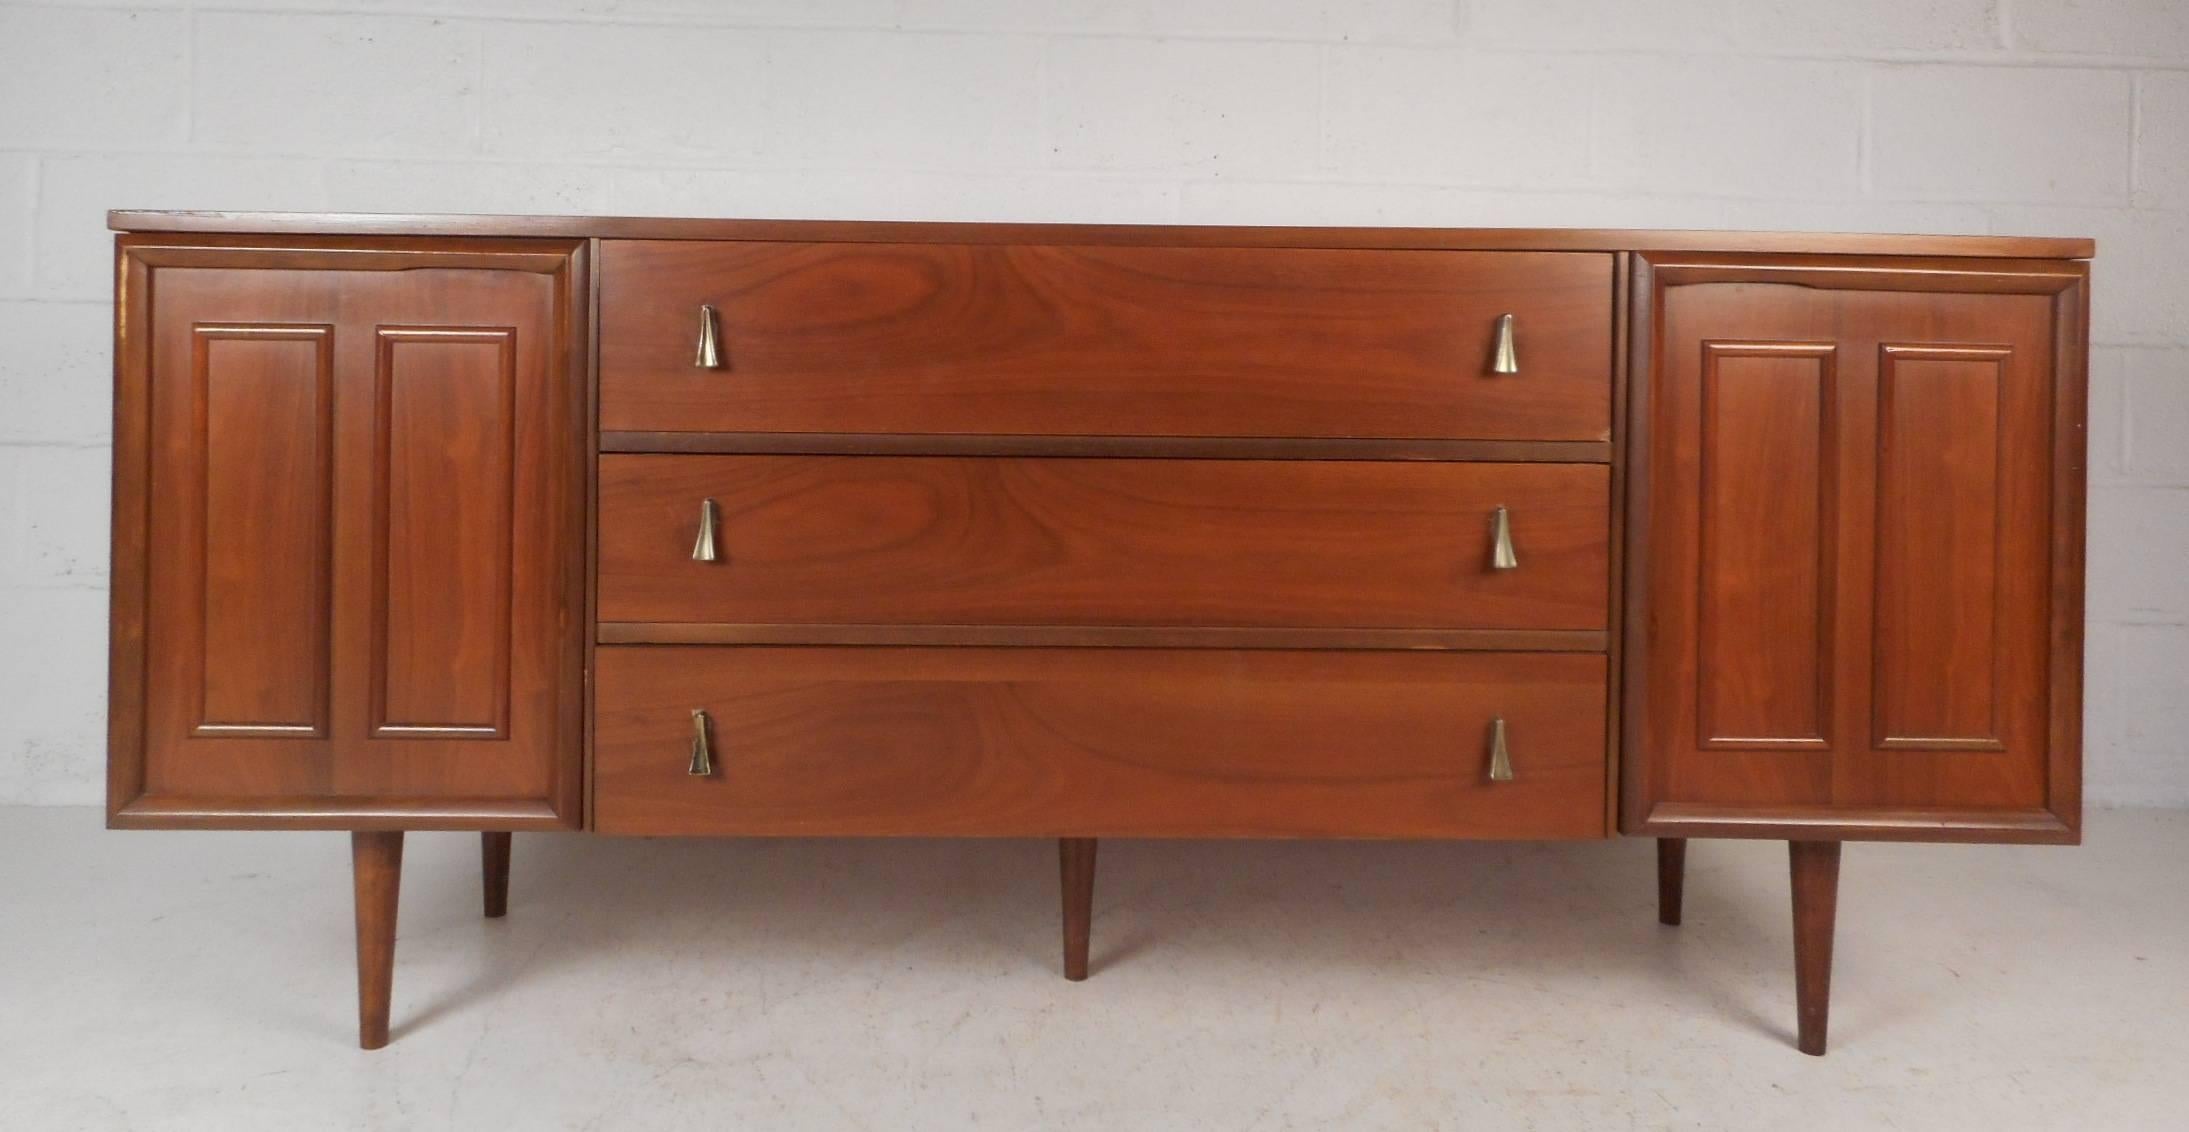 This stunning vintage modern credenza features six hidden drawers behind two cabinet doors and three large drawers in the centre. Unusual sculpted metal drawer pulls, tapered legs, and an elegant vintage walnut finish show quality craftsmanship. A